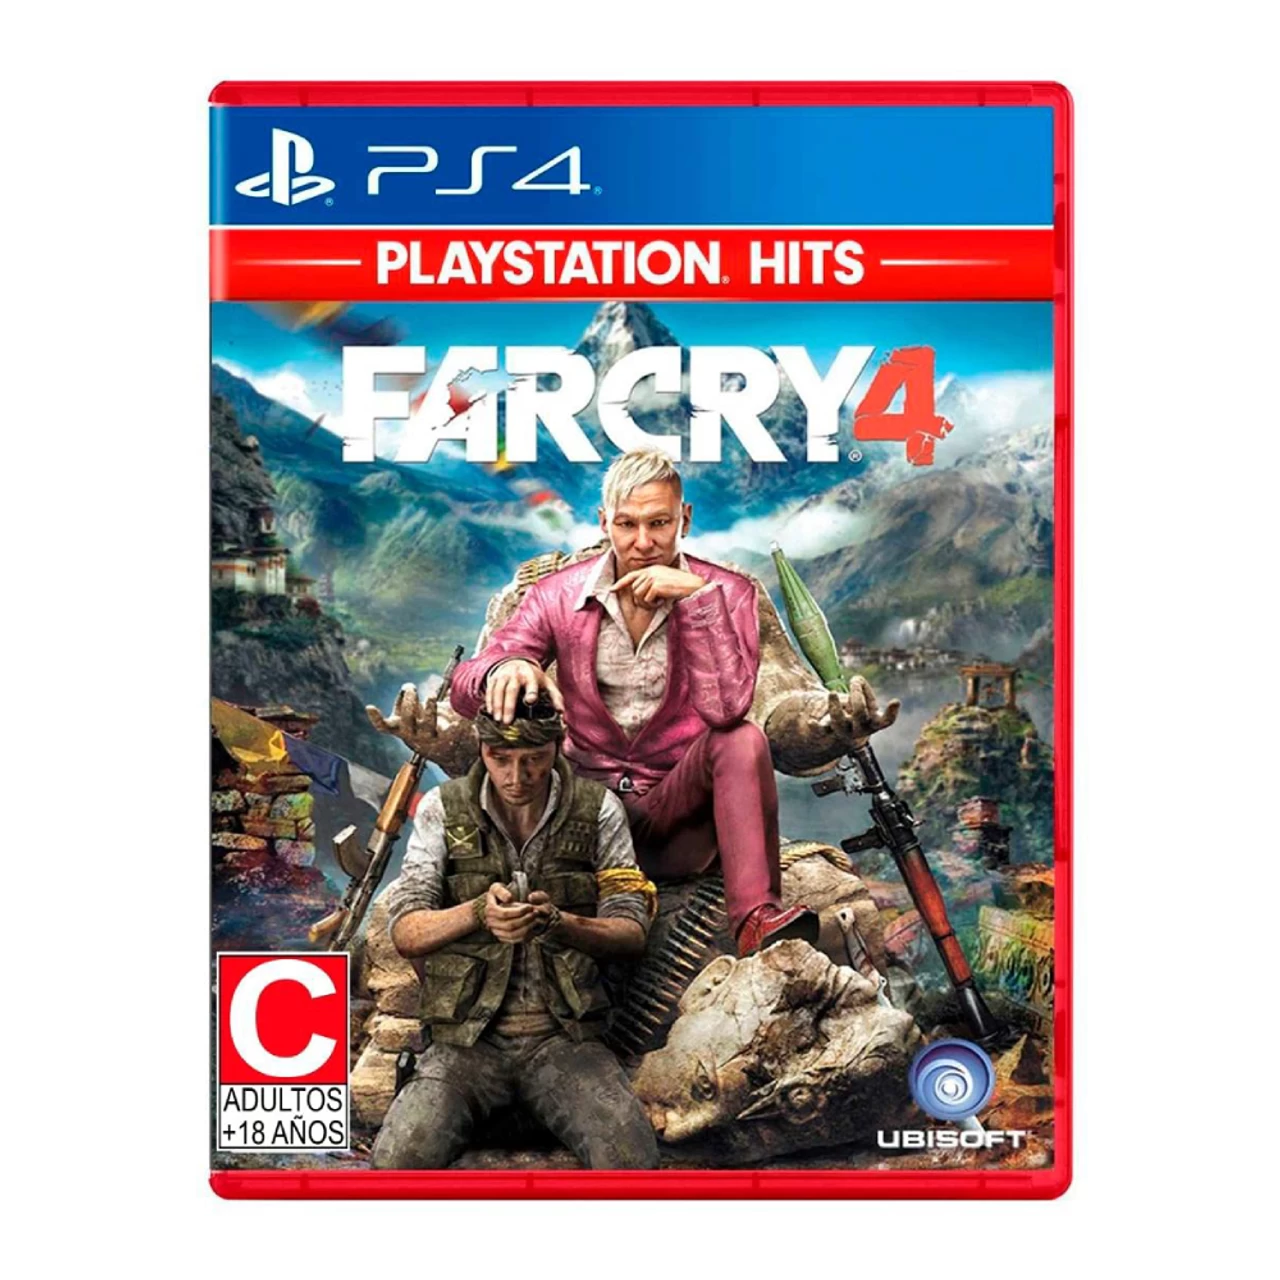 CD PS4 Farcry 4